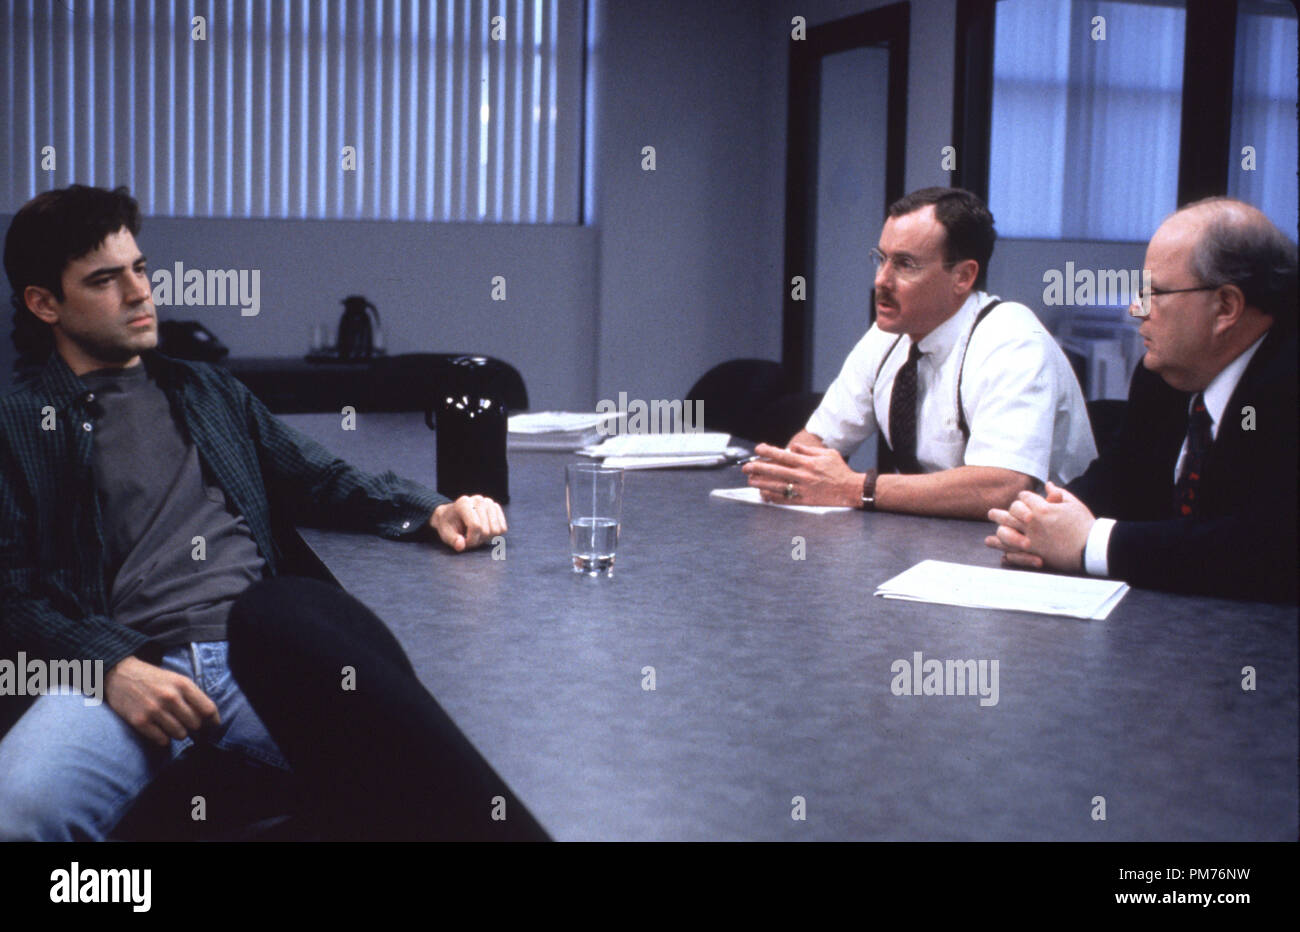 Film Still / Publicity Still from 'Office Space' Ron Livingston, John C. McGinley, & Paul Willson © 1999 20th  Photo Credit: Van Redin   File Reference # 30973503THA  For Editorial Use Only -  All Rights Reserved Stock Photo